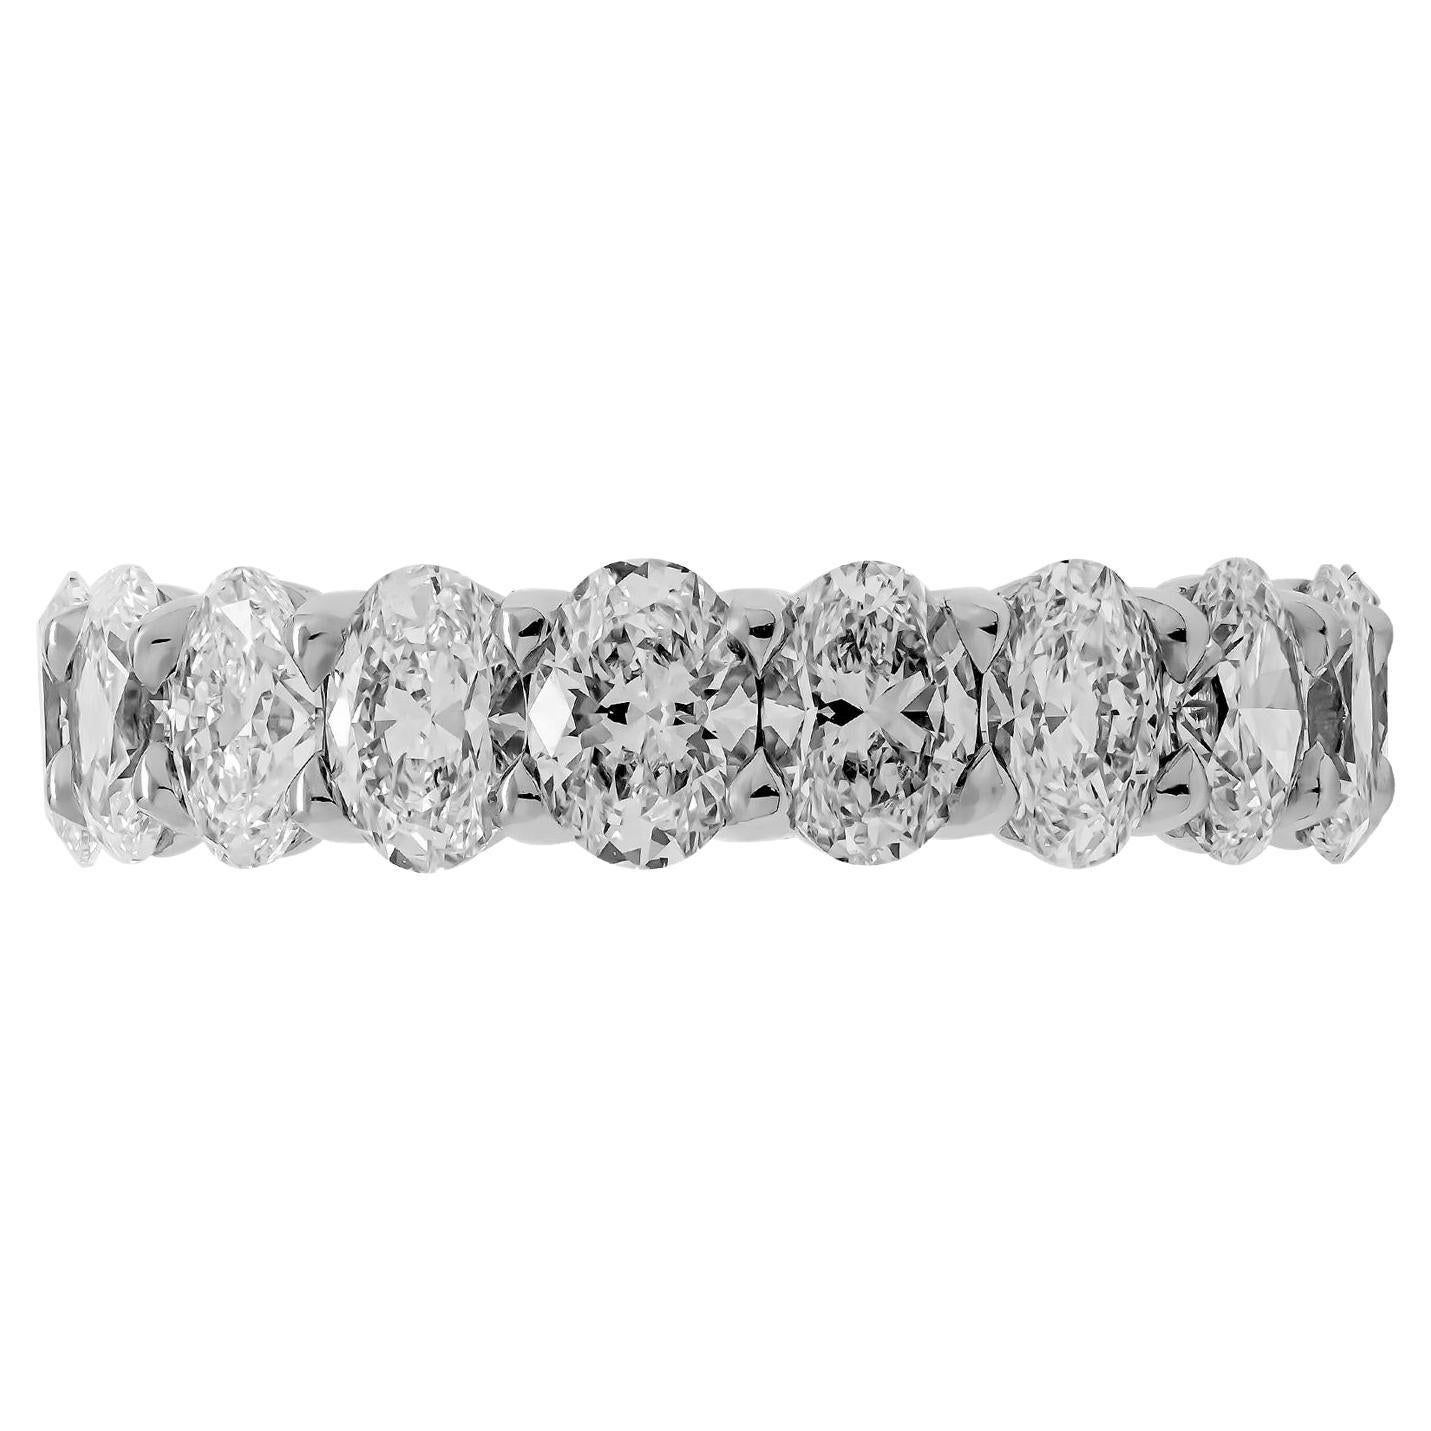 Anniversary wedding band 6.86ct in Platinum
17 Oval diamonds:
0.40ct E VVS1 GIA#1403130245 
0.40ct E VS1 GIA#6401103602
0.40ct F VVS2 GIA#7408244701
0.40ct F VS1 GIA#2406126641 
0.40ct D VS1 GIA#2407129716 
0.42ct D VVS2 GIA#6395043851
0.40ct G VS1